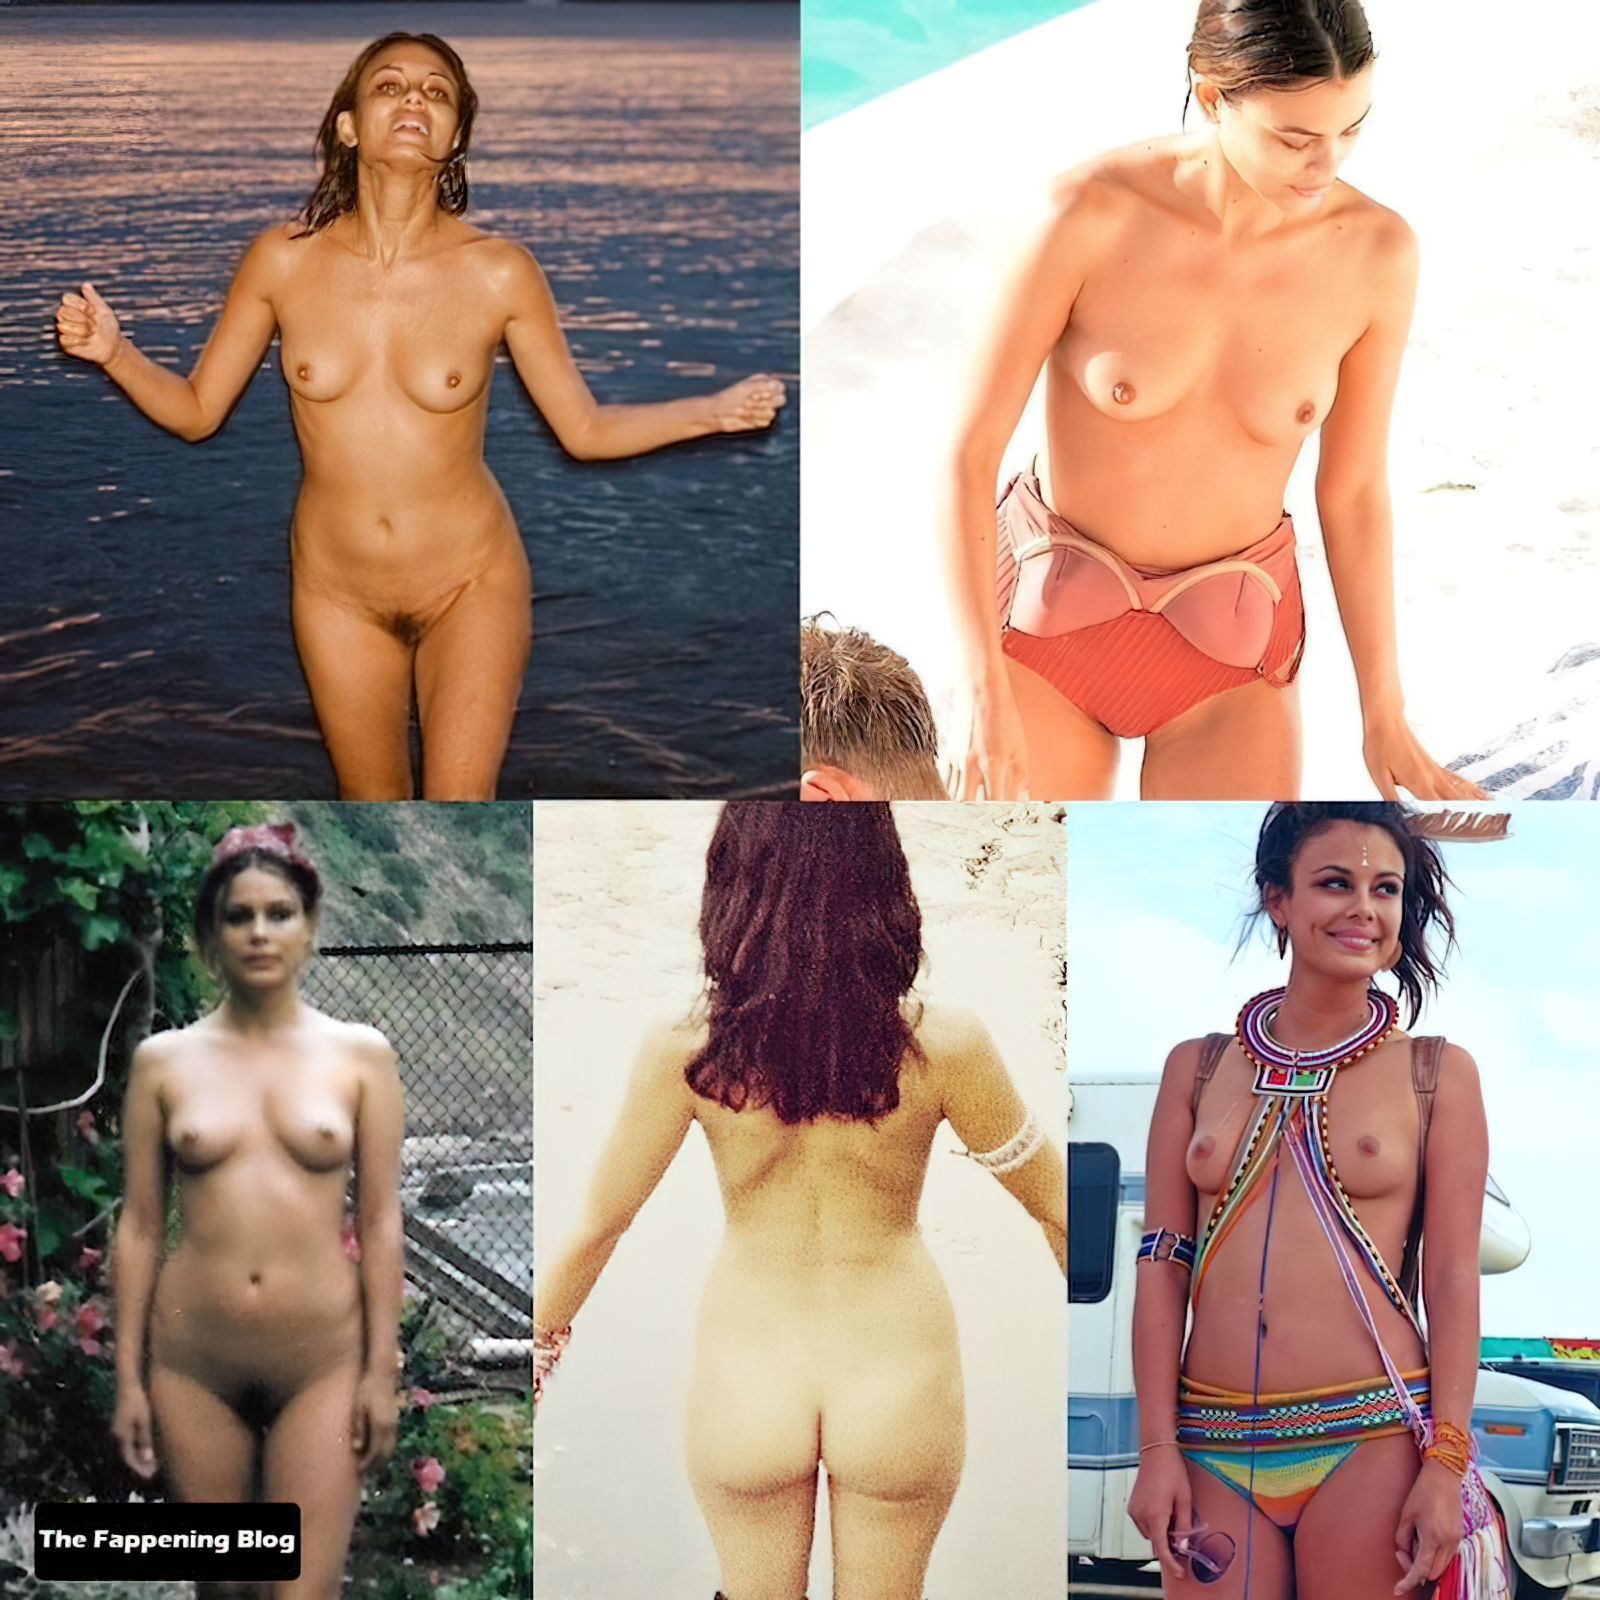 Nathalie Kelley Nude Sexy (42 Pics) - EverydayCum💦 & The Fappening...